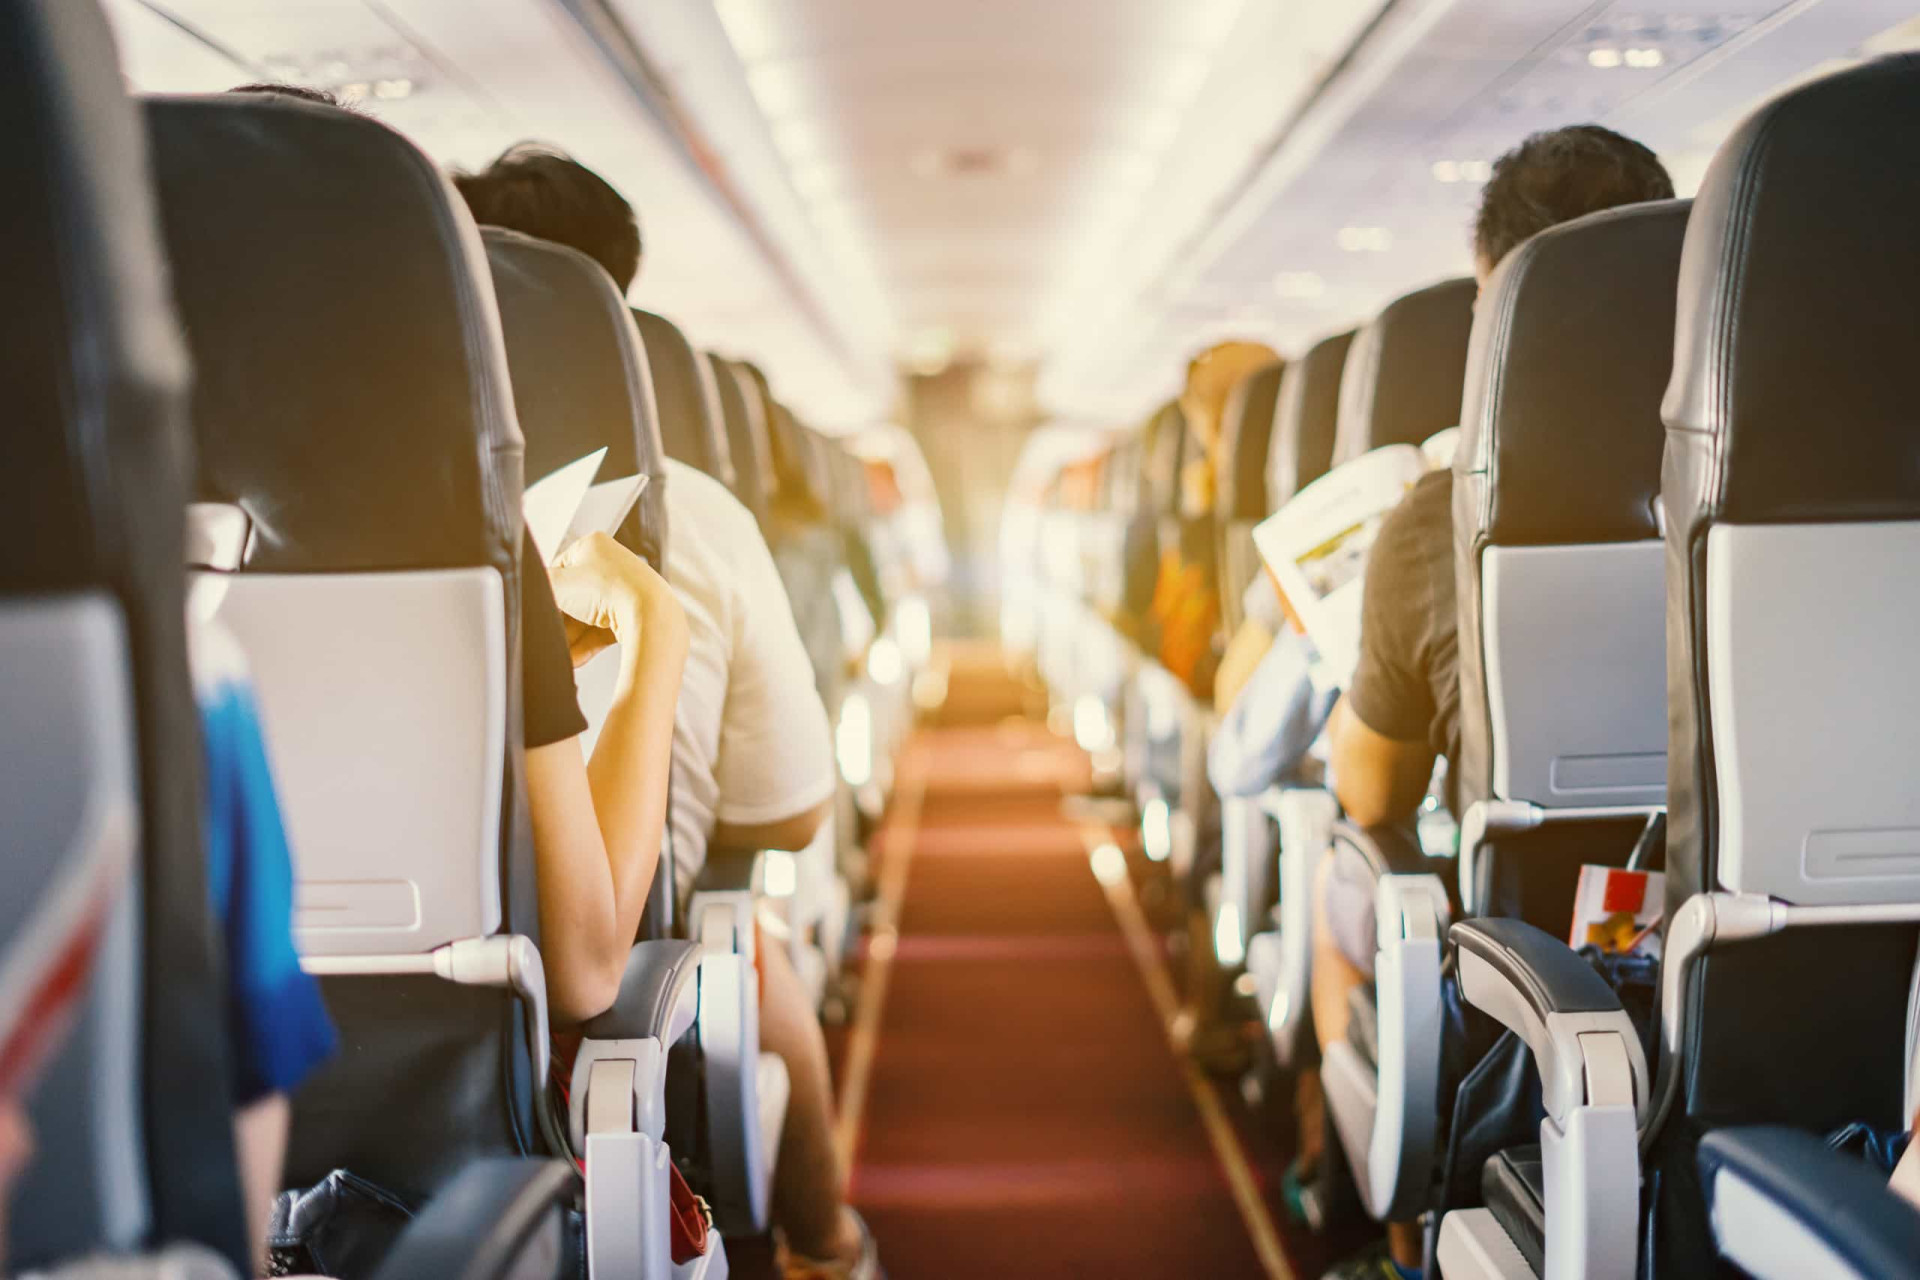 <p>As most people will scramble to be at the front, you've got a far better chance of ending up with an empty seat or two beside you at the back. Before your flight, keep an eye out to see if there are any empty rows you can claim last minute.</p><p>You may also like:<a href="https://www.starsinsider.com/n/164853?utm_source=msn.com&utm_medium=display&utm_campaign=referral_description&utm_content=500296v1en-us"> These actors were heartthrobs in their youth </a></p>